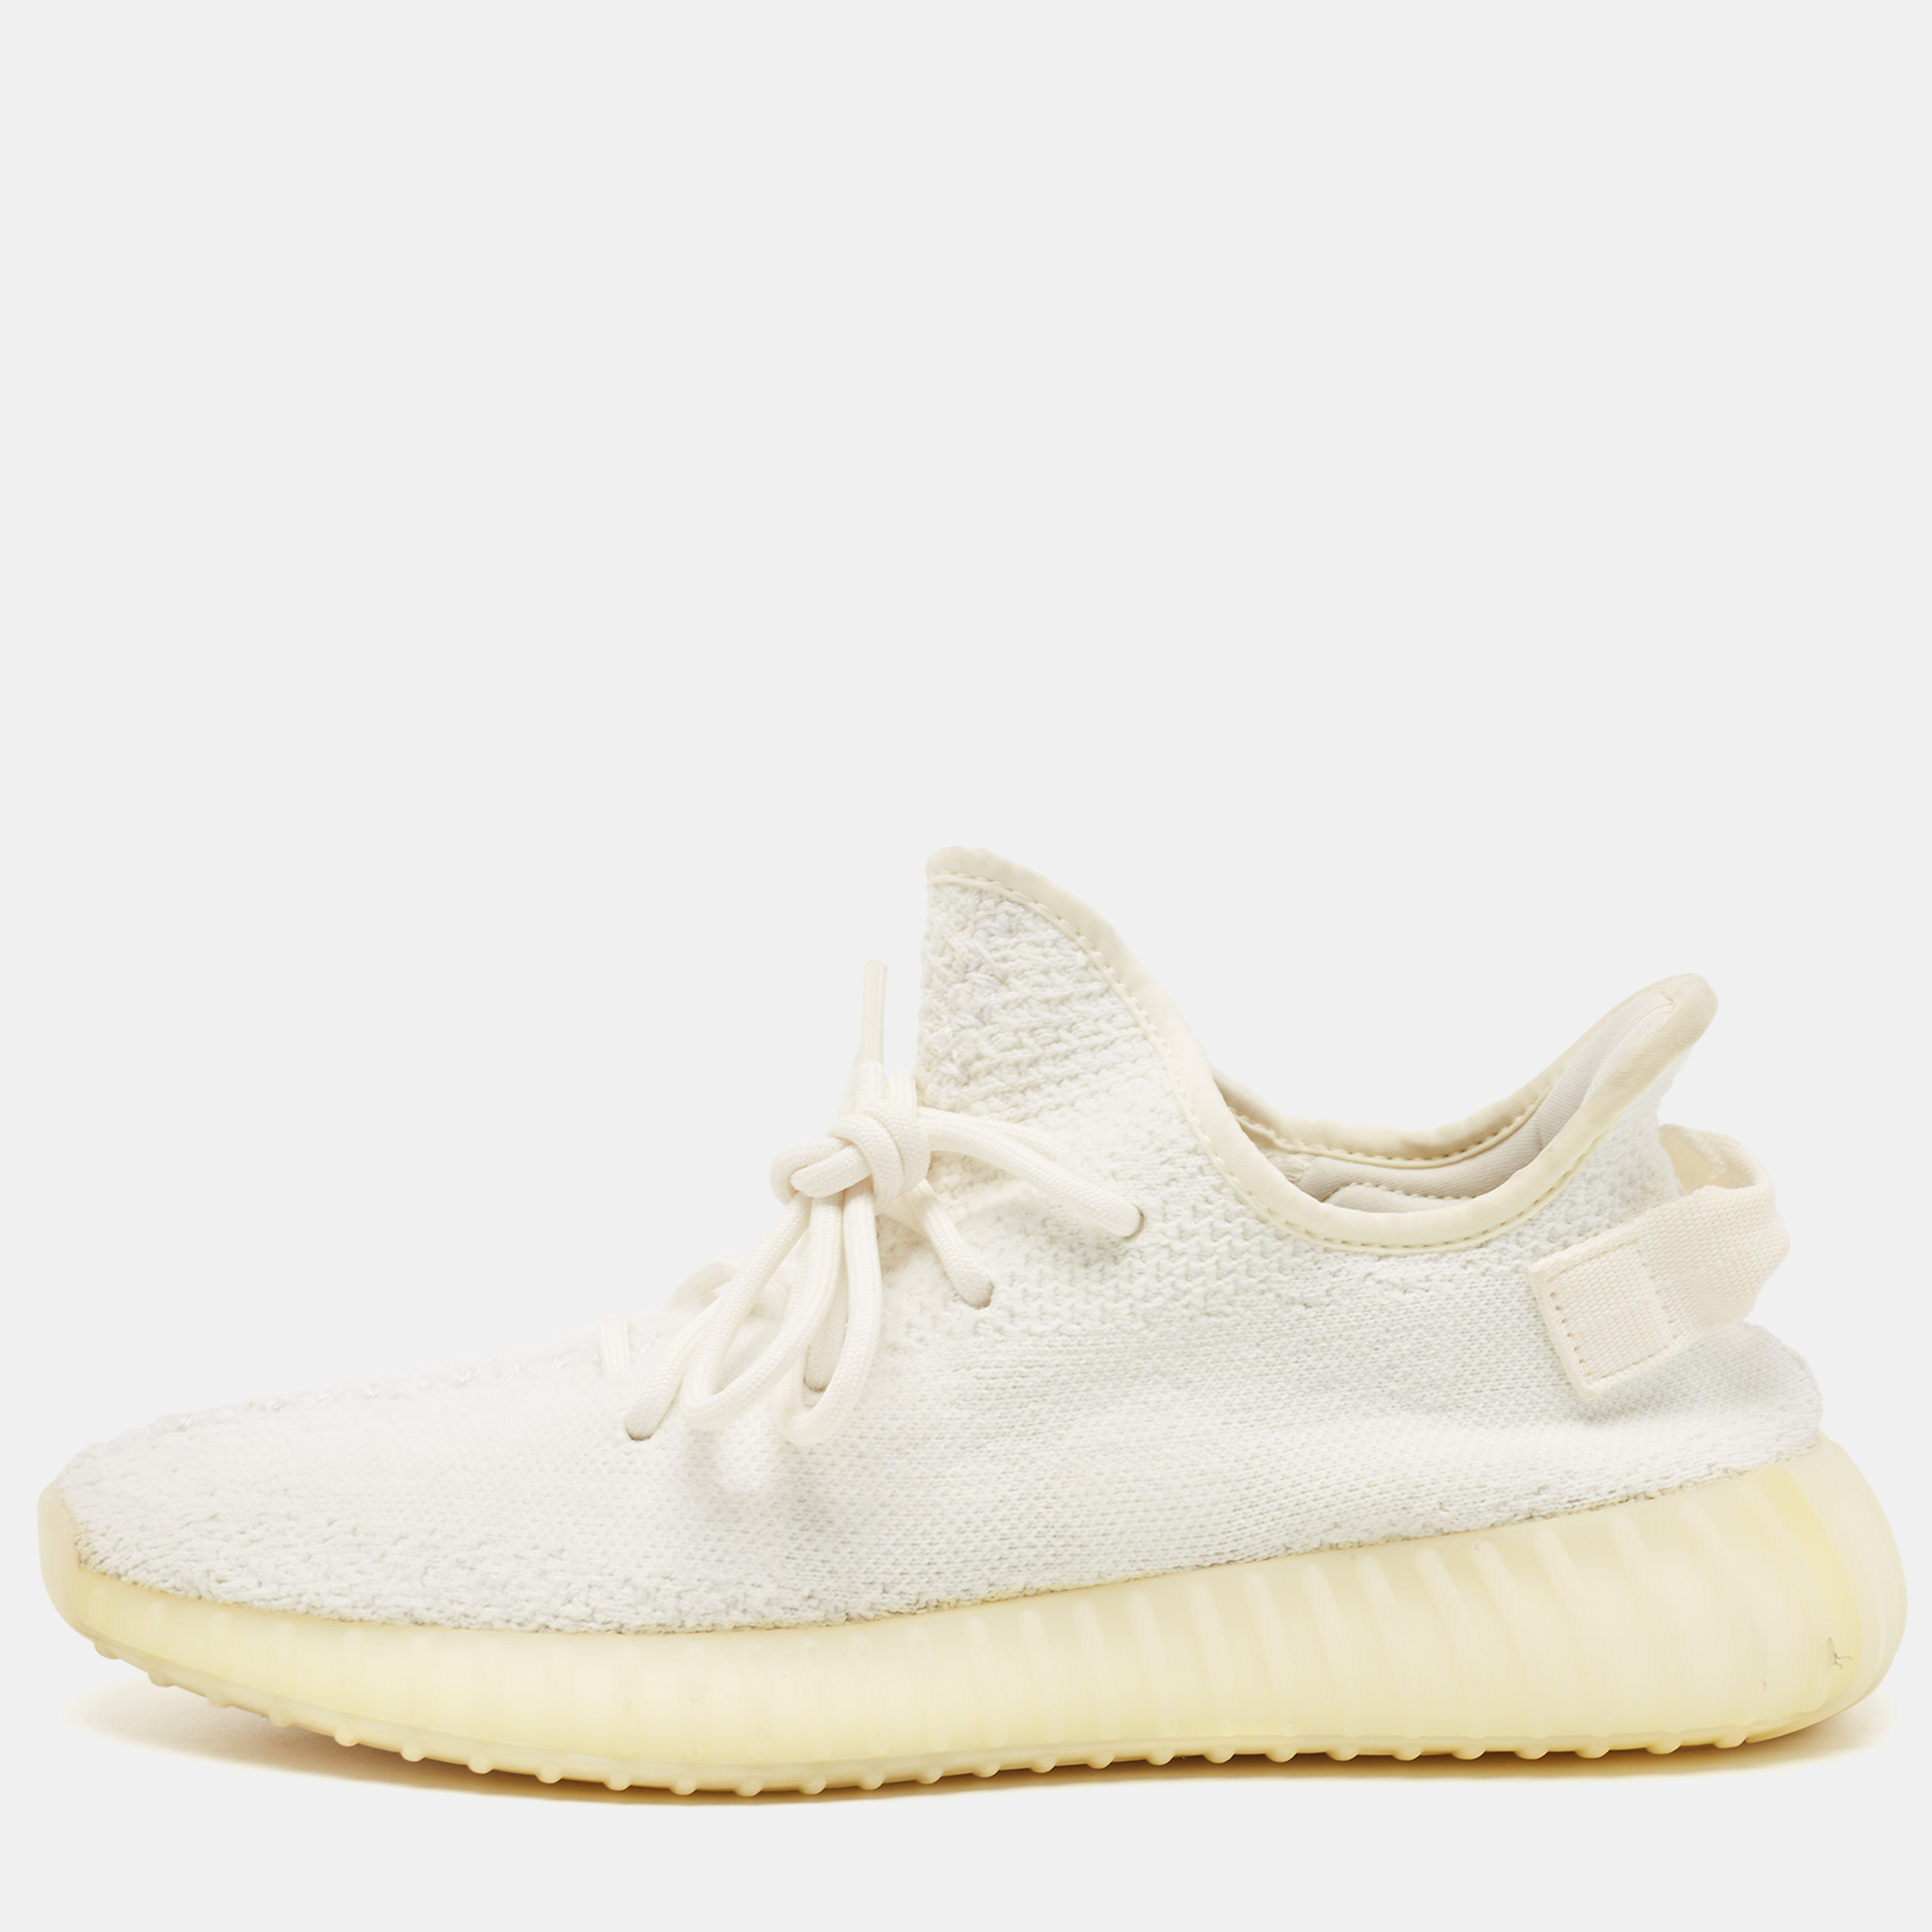 Pre-owned Yeezy Adidas X  White Cotton Knit Fabric Boost 350 V2 Triple White Sneakers Size 43 1/3